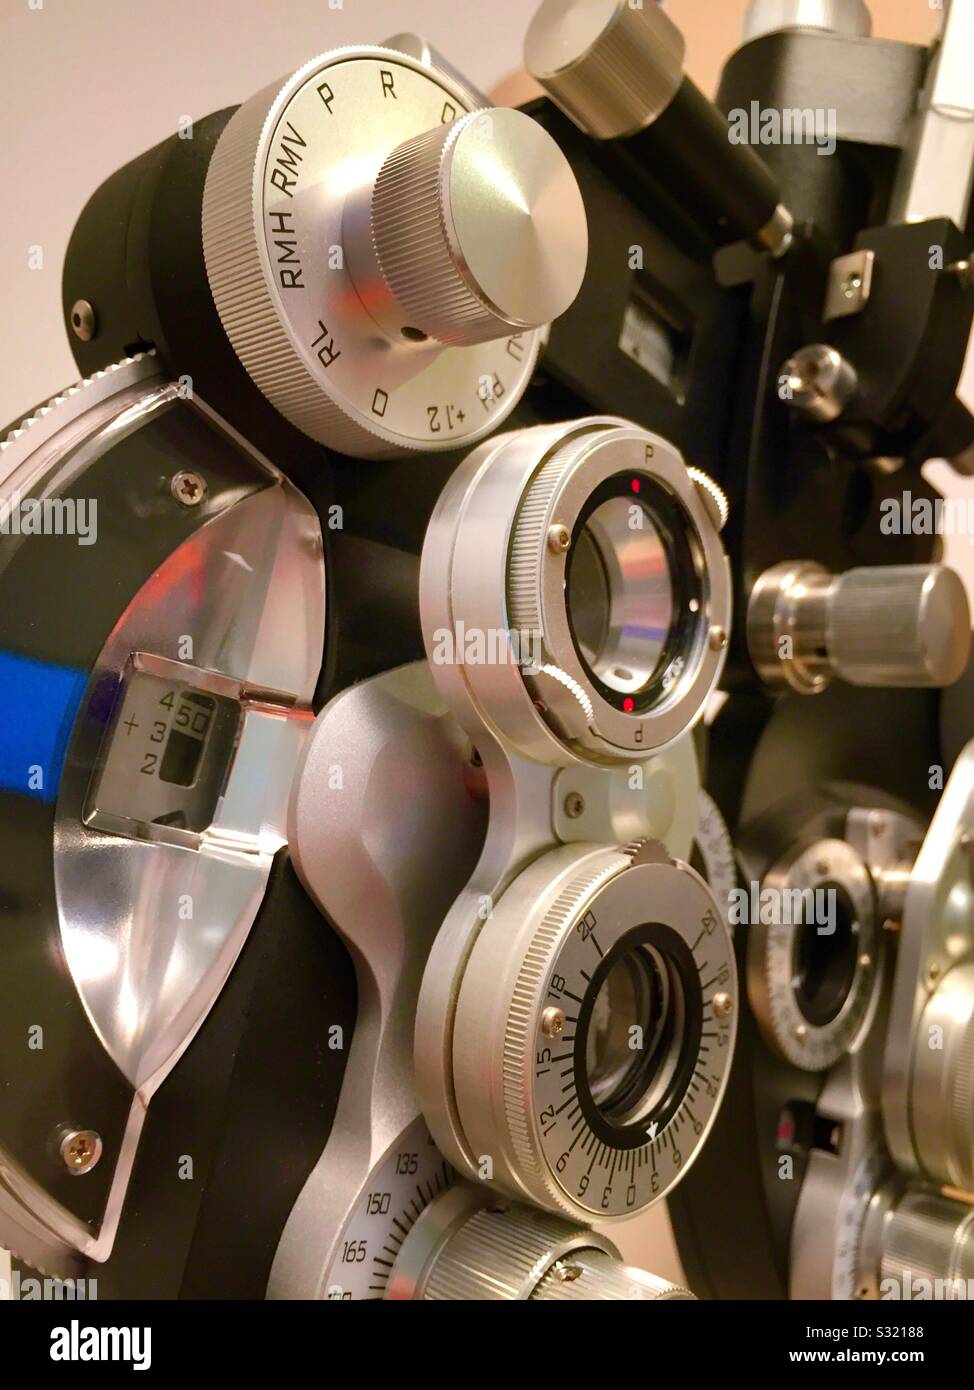 Ophthalmology yes, close-up of a phoropter refraction machine, USA Stock Photo